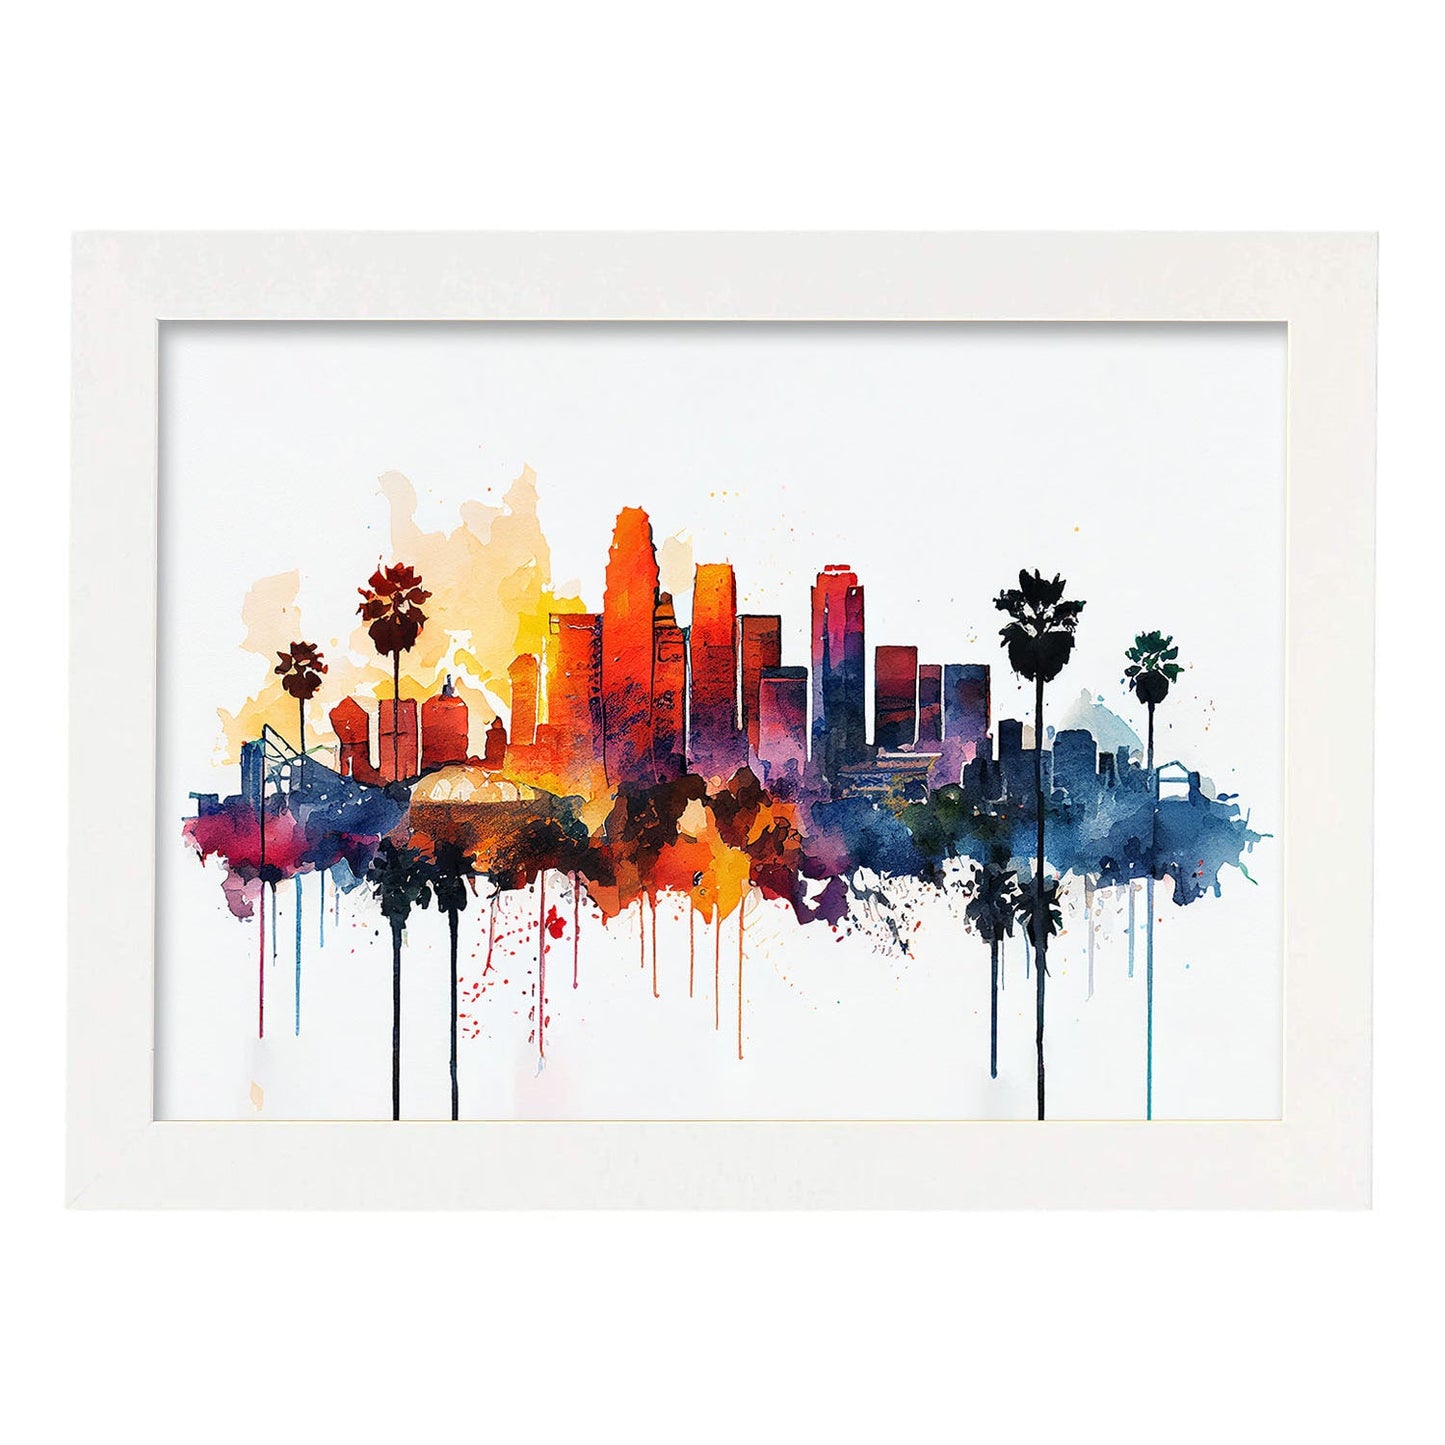 Nacnic watercolor of a skyline of the city of Los Angeles_4. Aesthetic Wall Art Prints for Bedroom or Living Room Design.-Artwork-Nacnic-A4-Marco Blanco-Nacnic Estudio SL